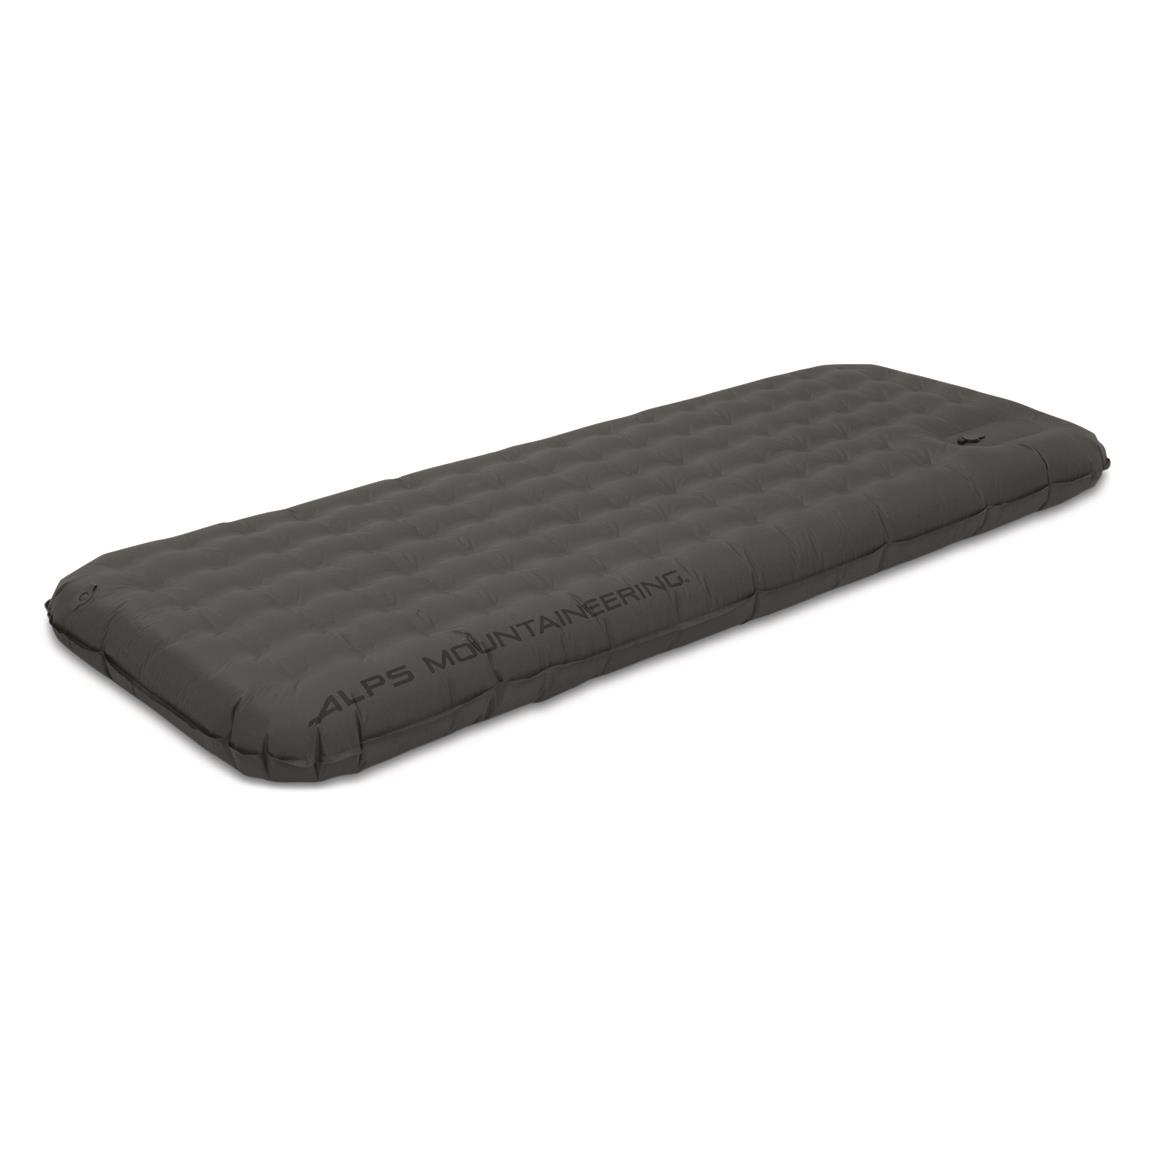 ALPS Mountaineering Oasis Air Pad, Charcoal